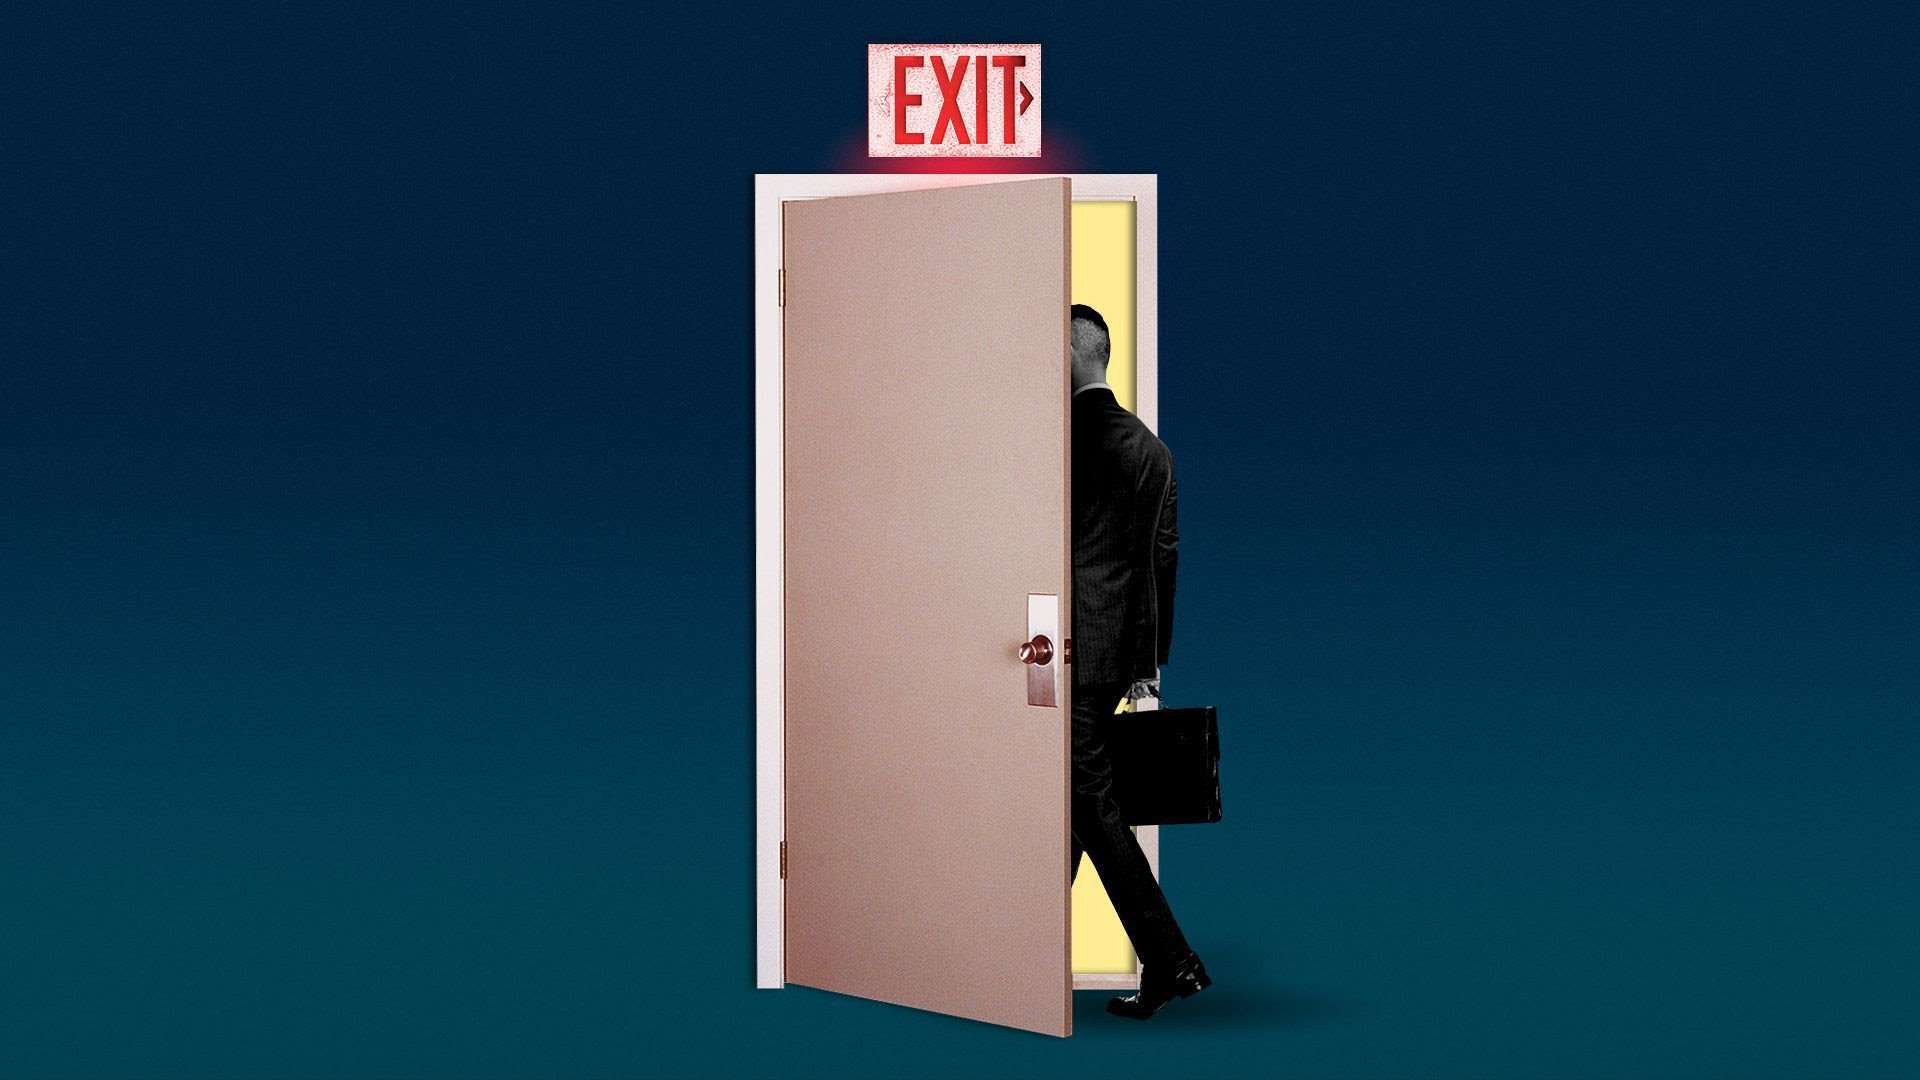 A person in a suit carrying a briefcase walks out a door with an "Exit" sign above it.